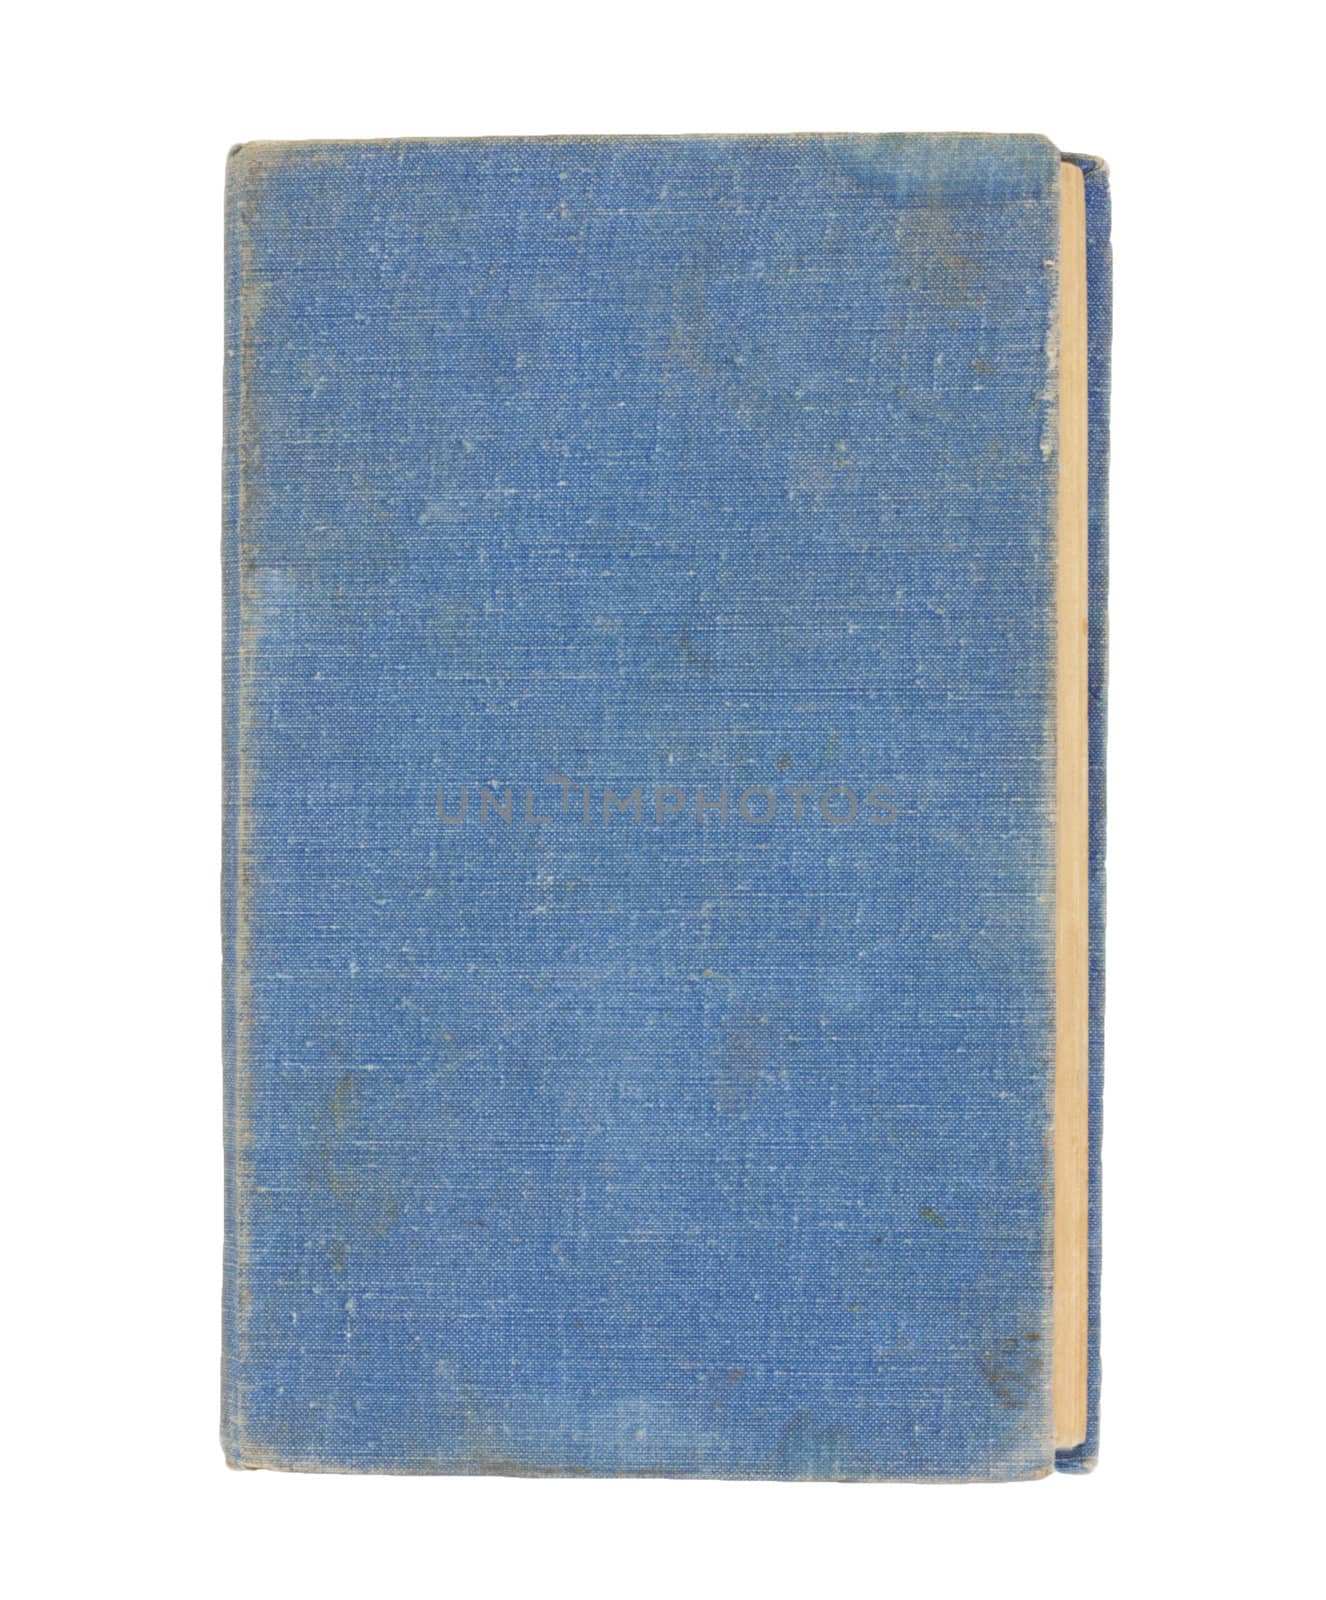 old blue book on a white background by schankz